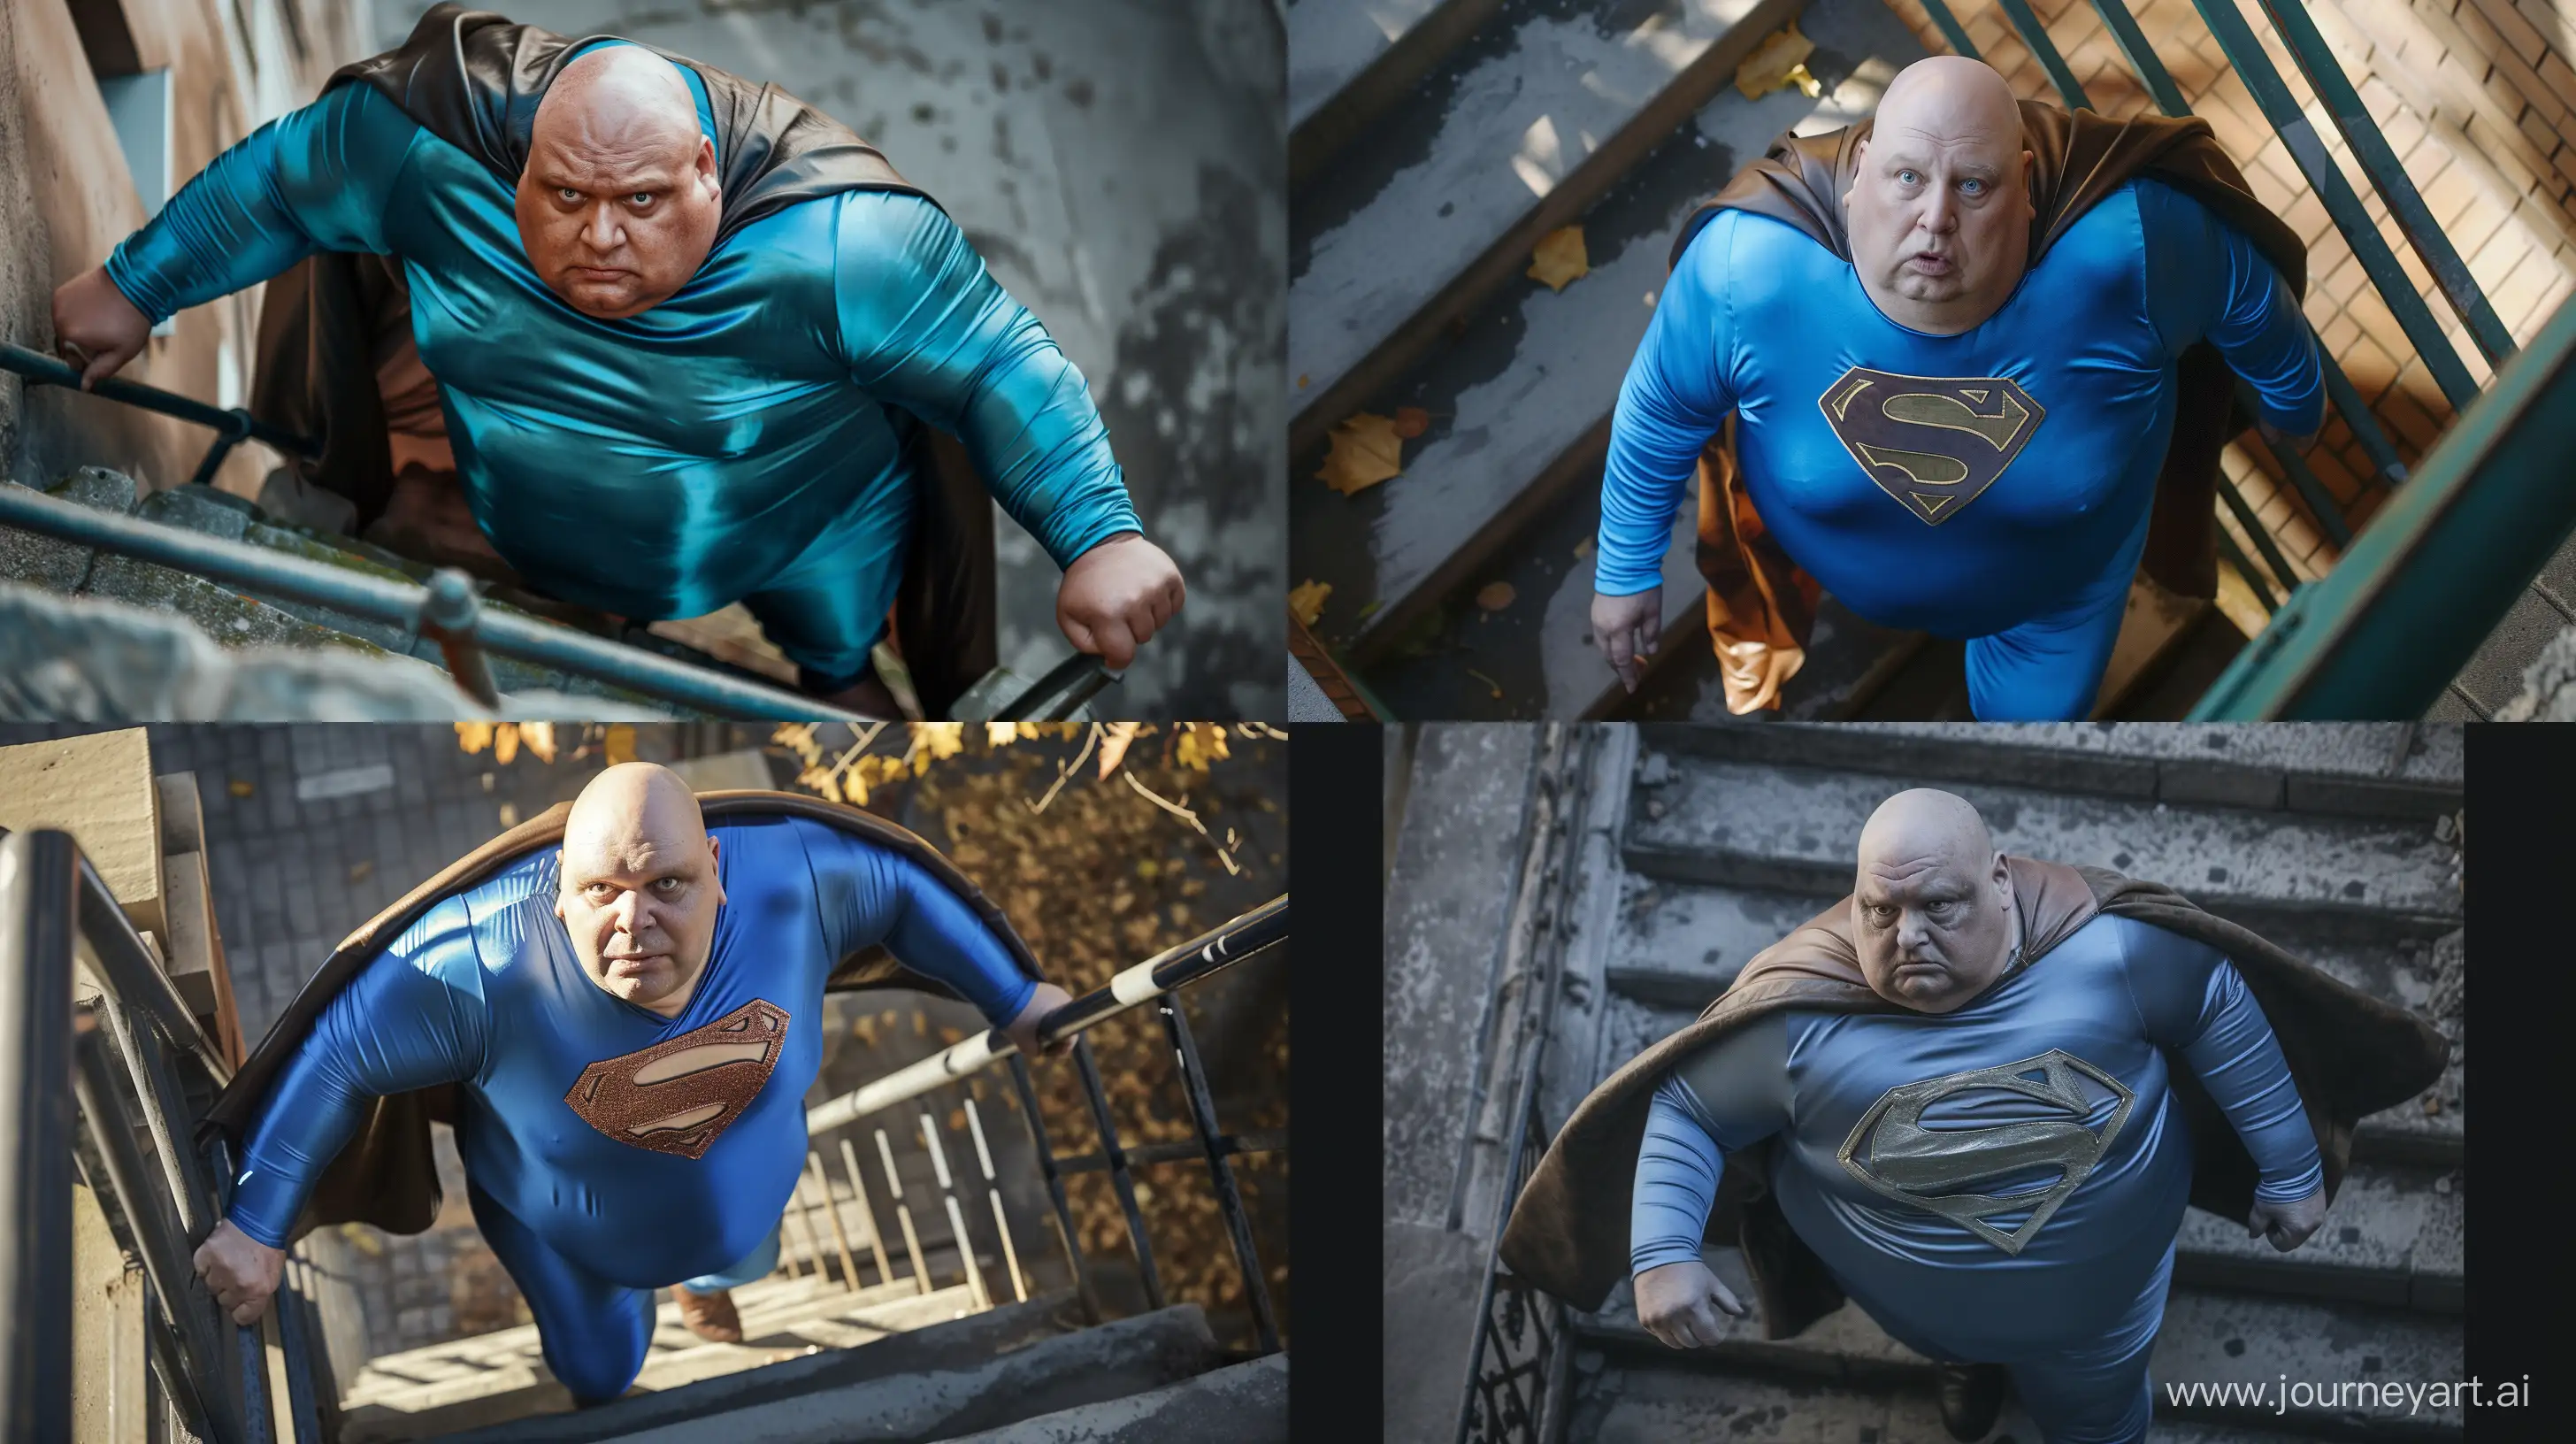 Exhausted-Superman-Climbing-Stairs-Candid-Shot-of-Obese-Man-in-Silk-Blue-Costume